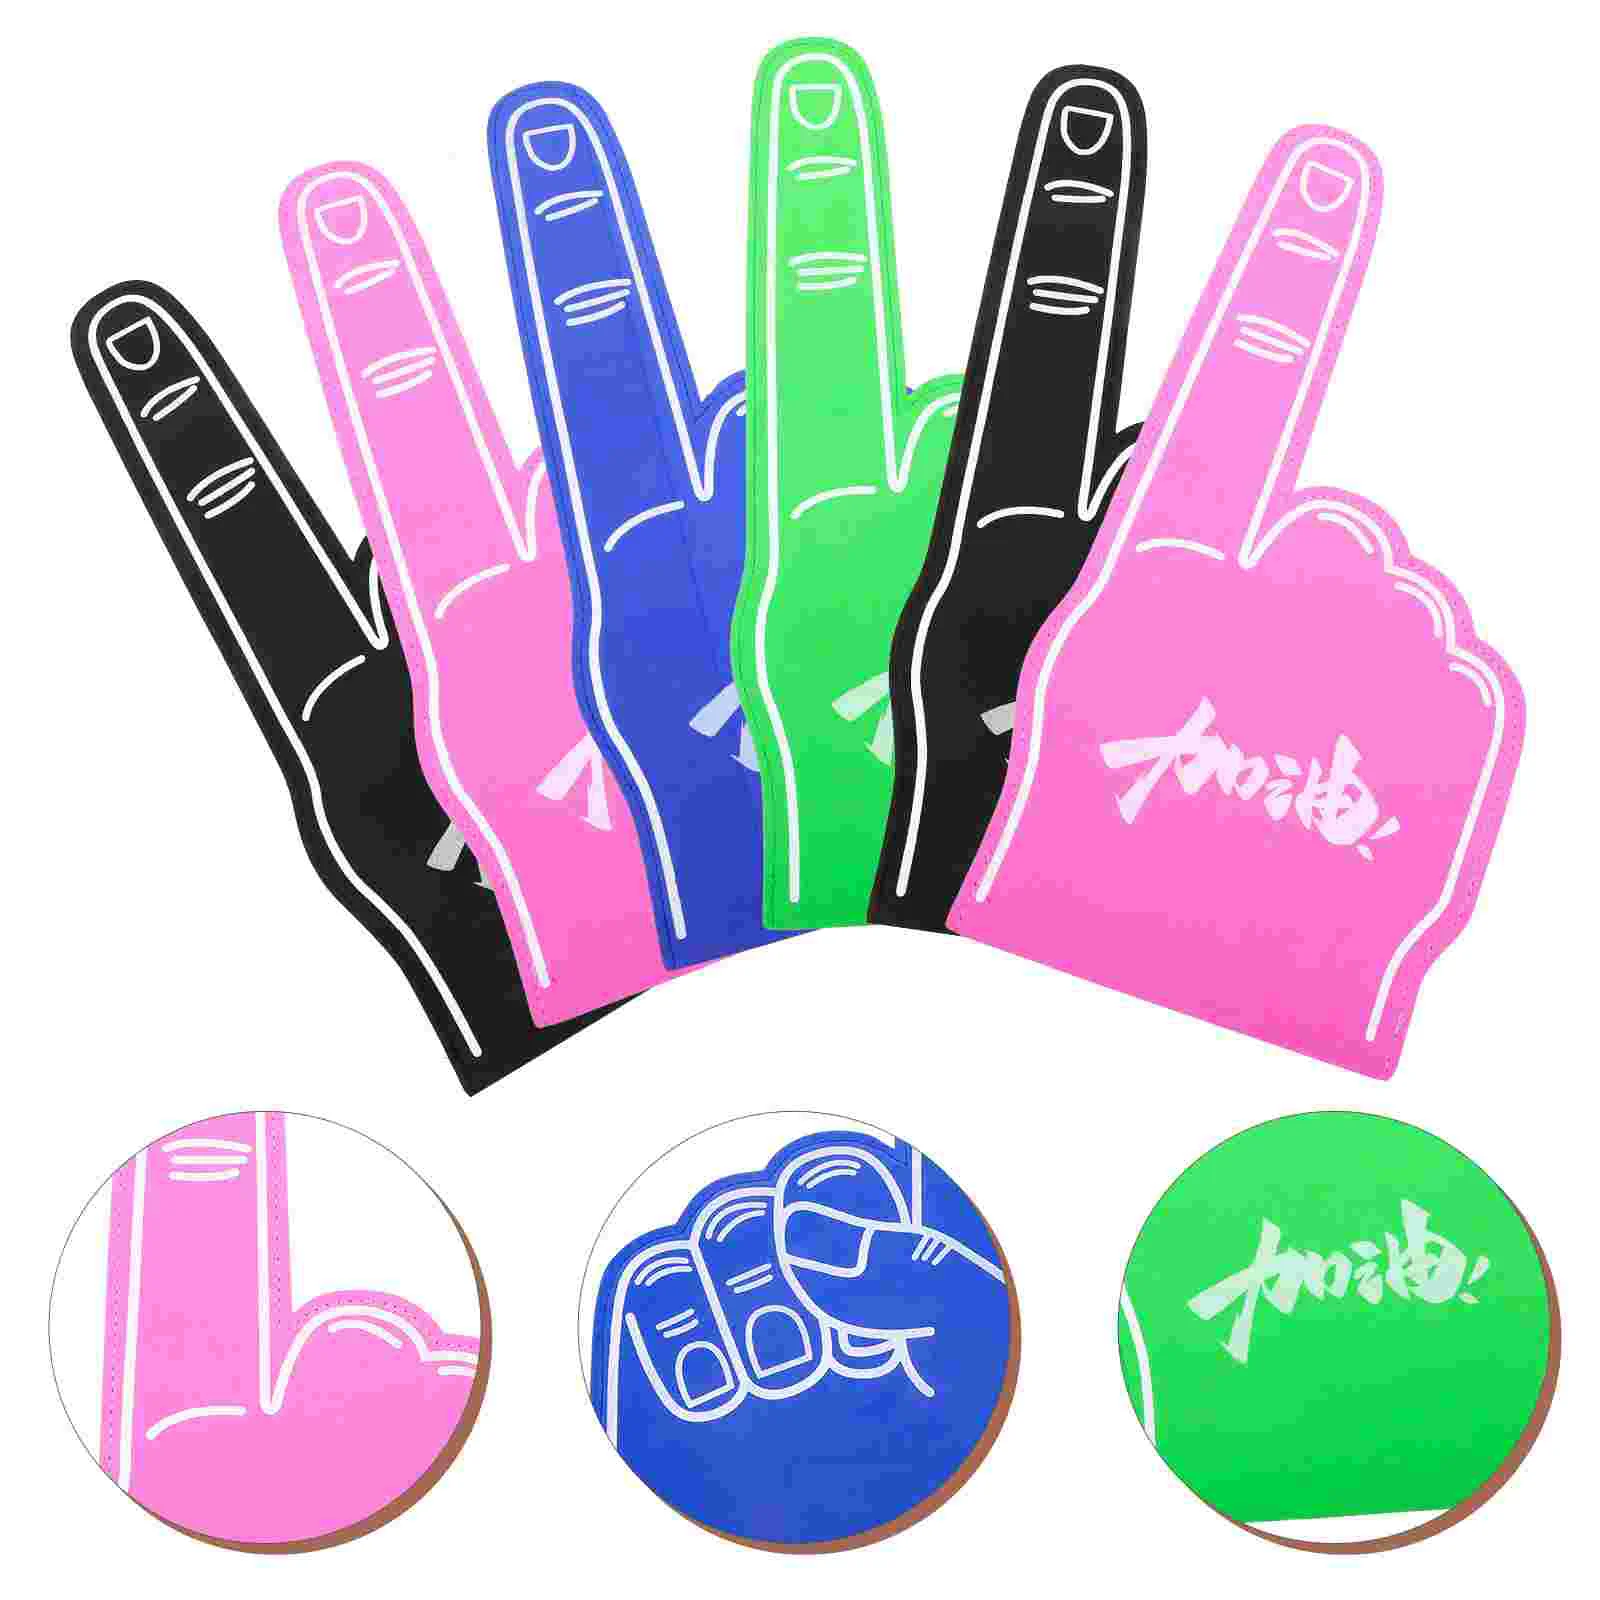 

6 Pcs Hand Support Props Green Toys Cheerleading Foam Fingers at Night Gloves Cheering for Sporting Events Eva Palm